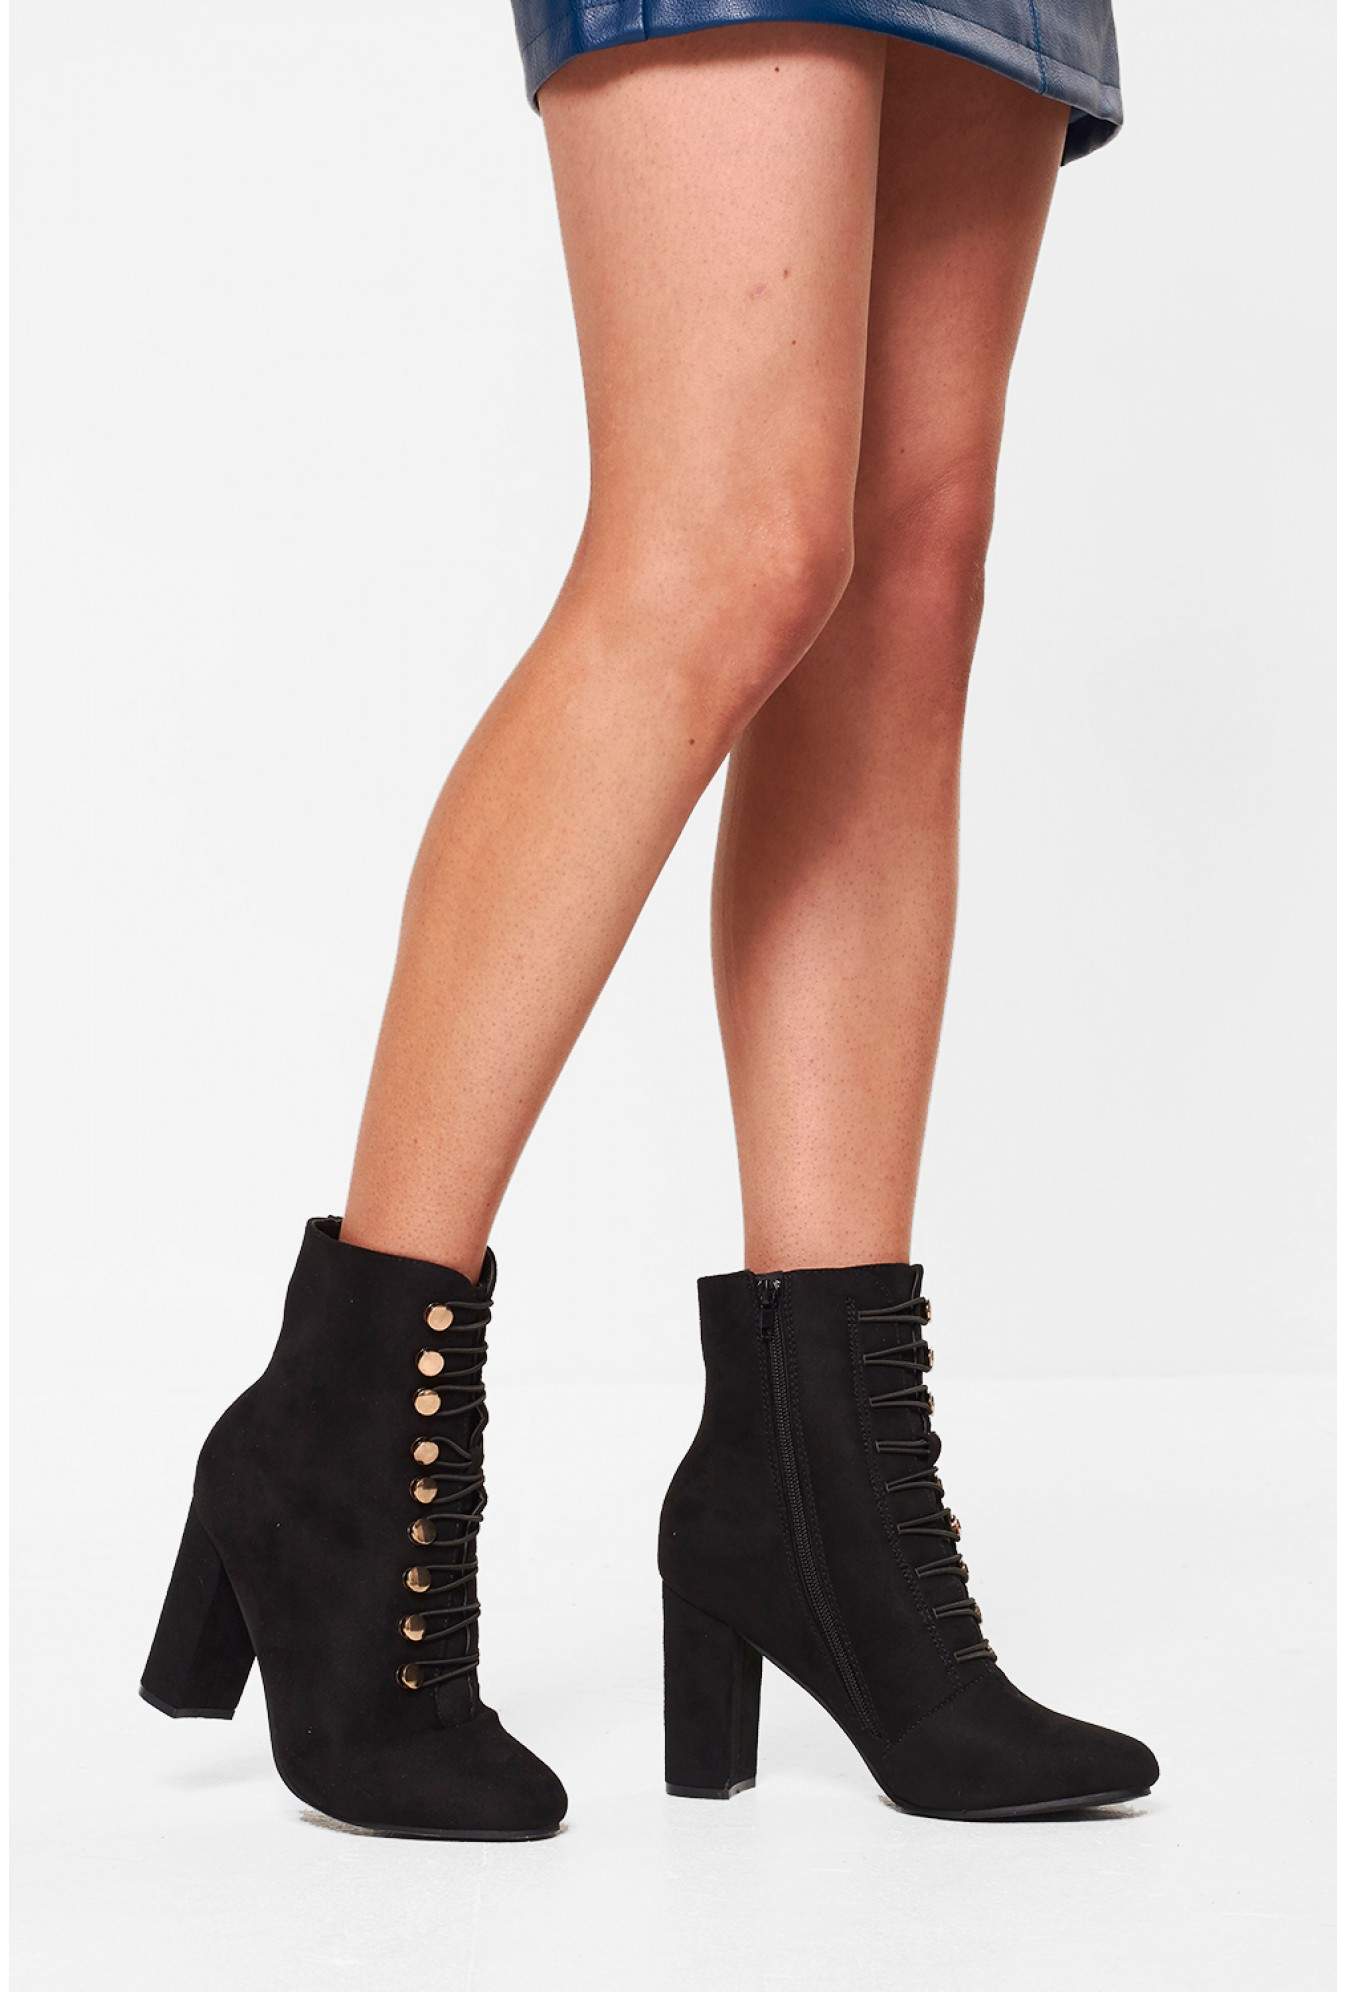 black heeled lace up ankle boots